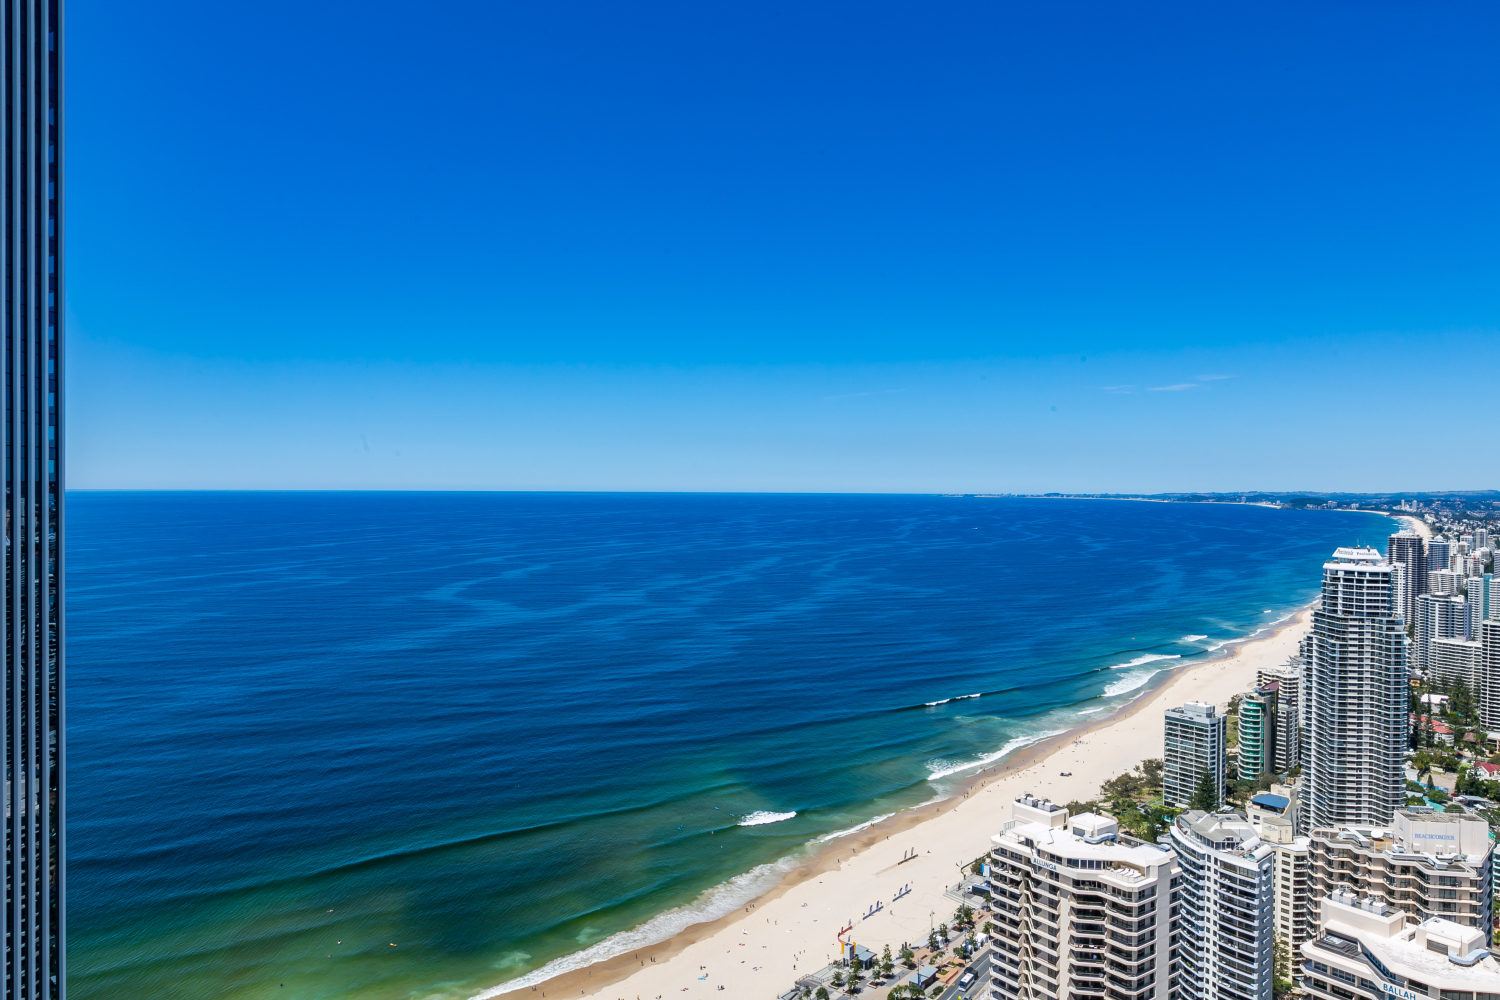 South East views of Surfers Paradise beach